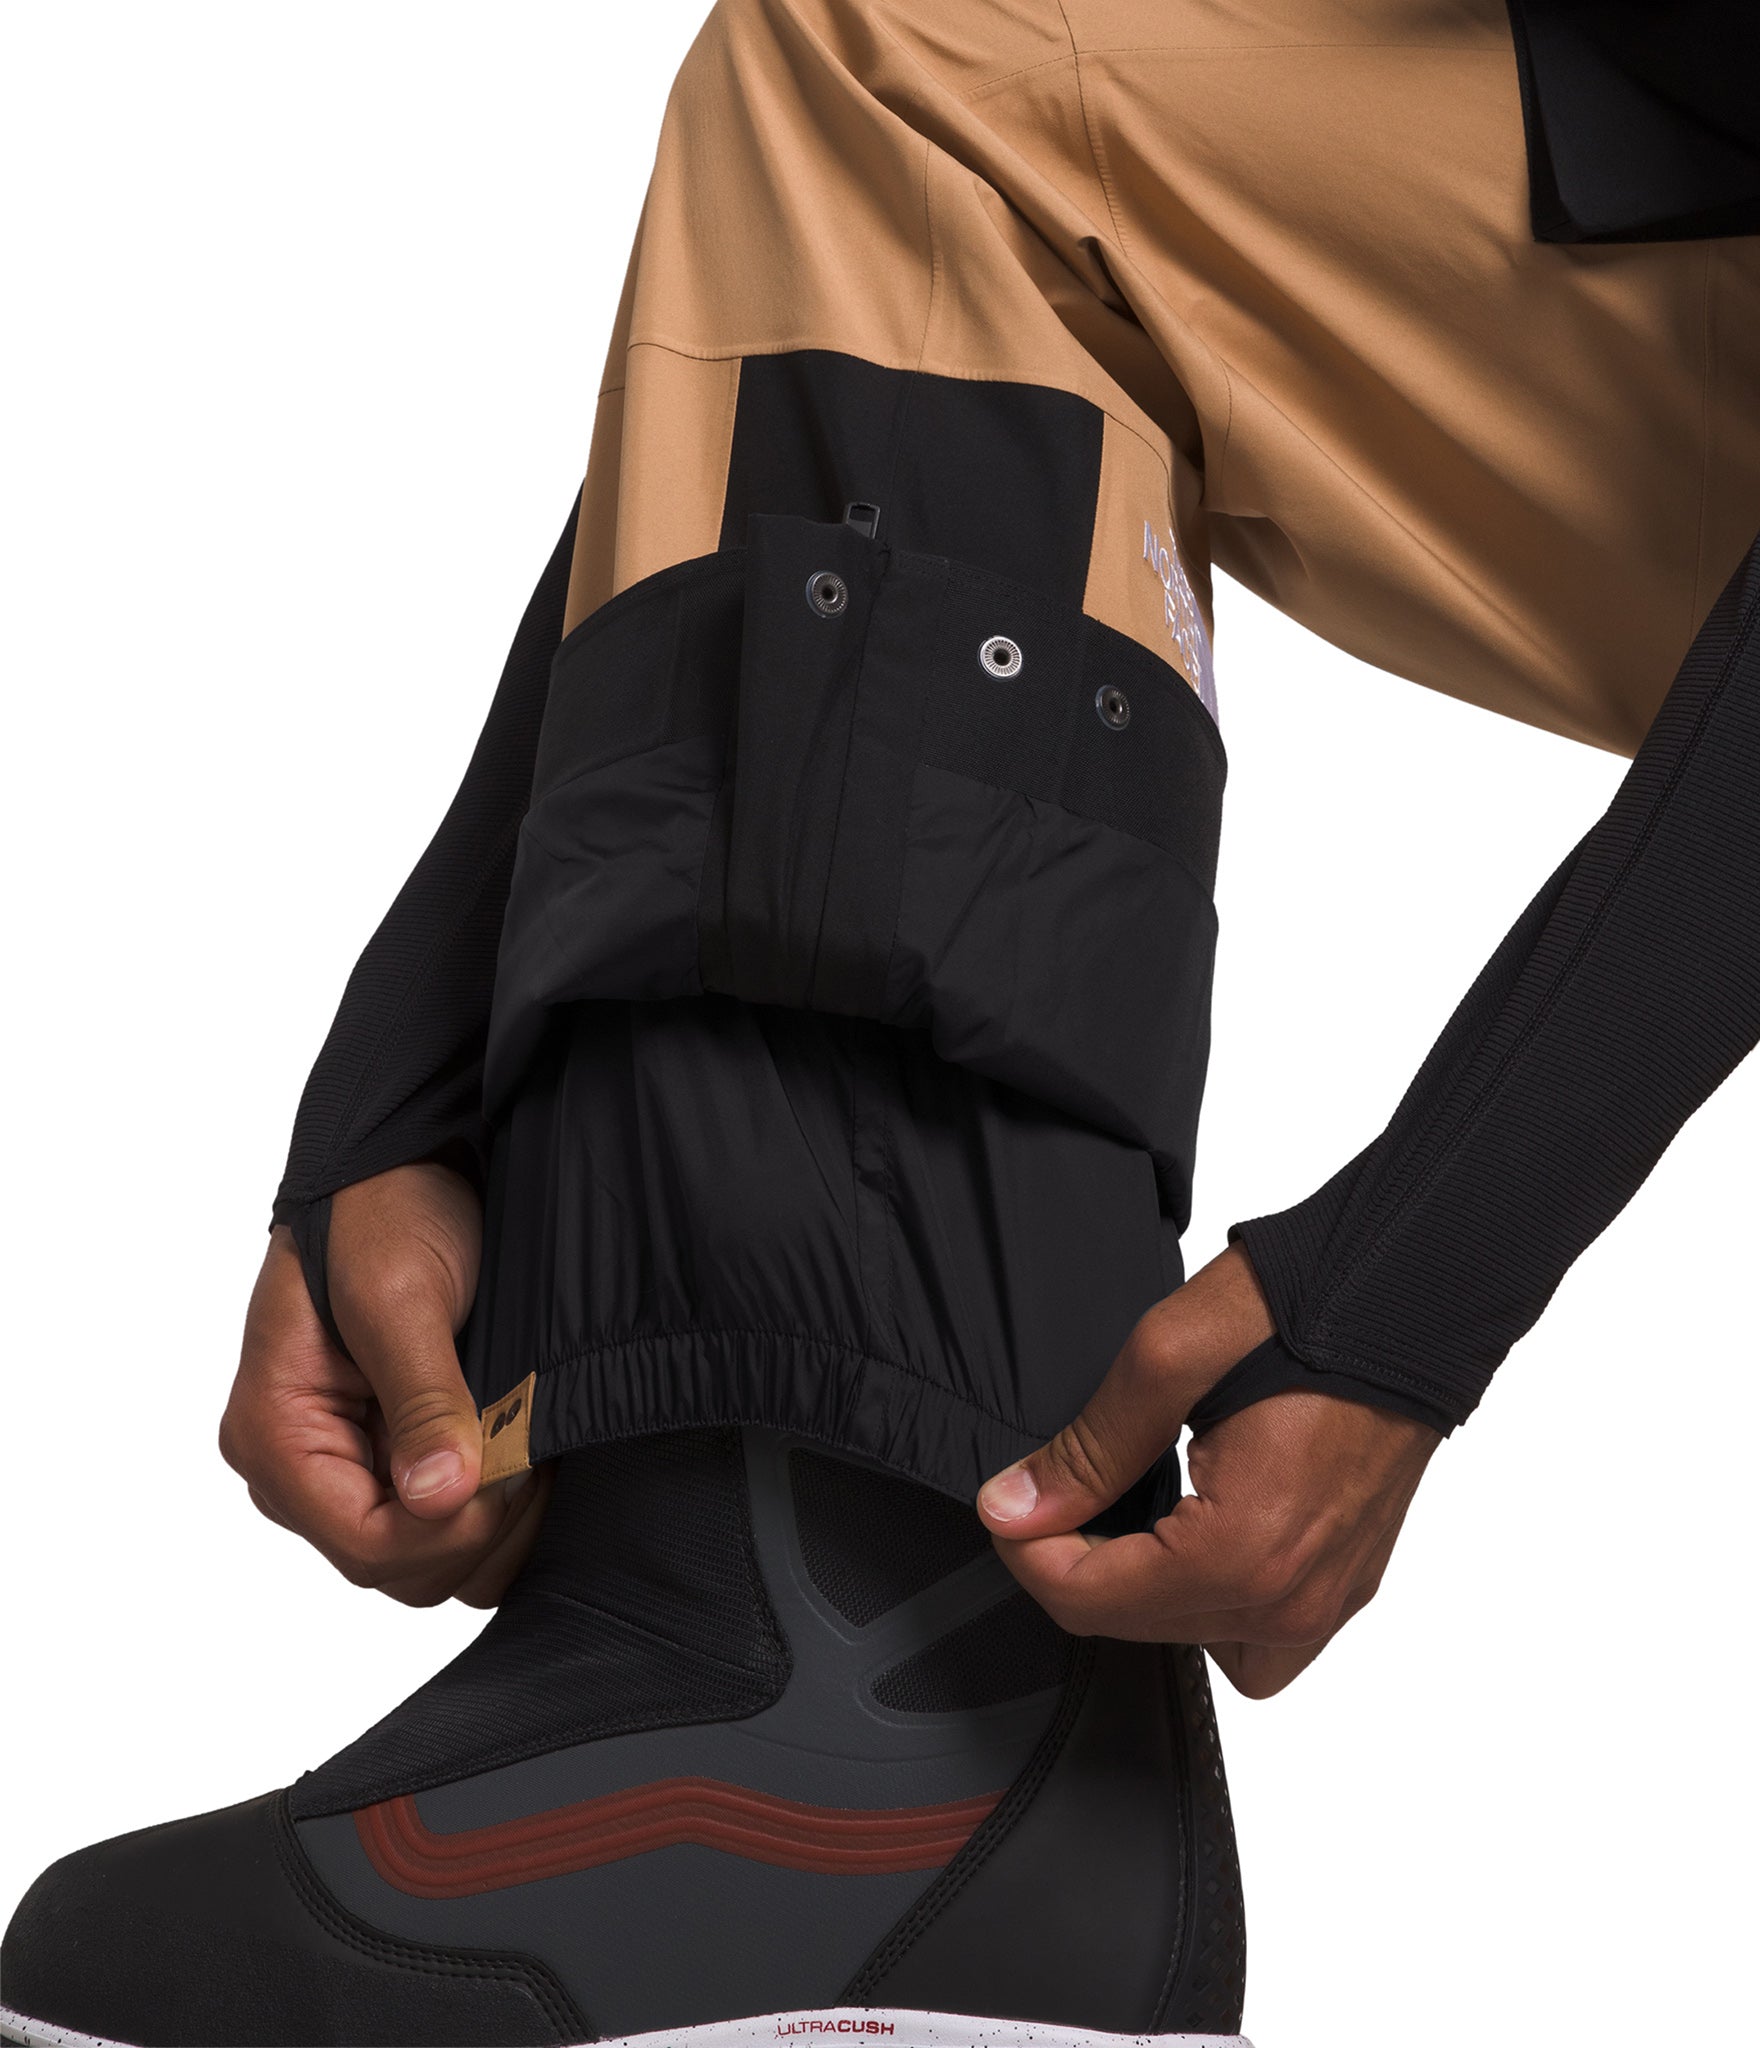 The North Face Sidecut GORE-TEX Trousers - Men's